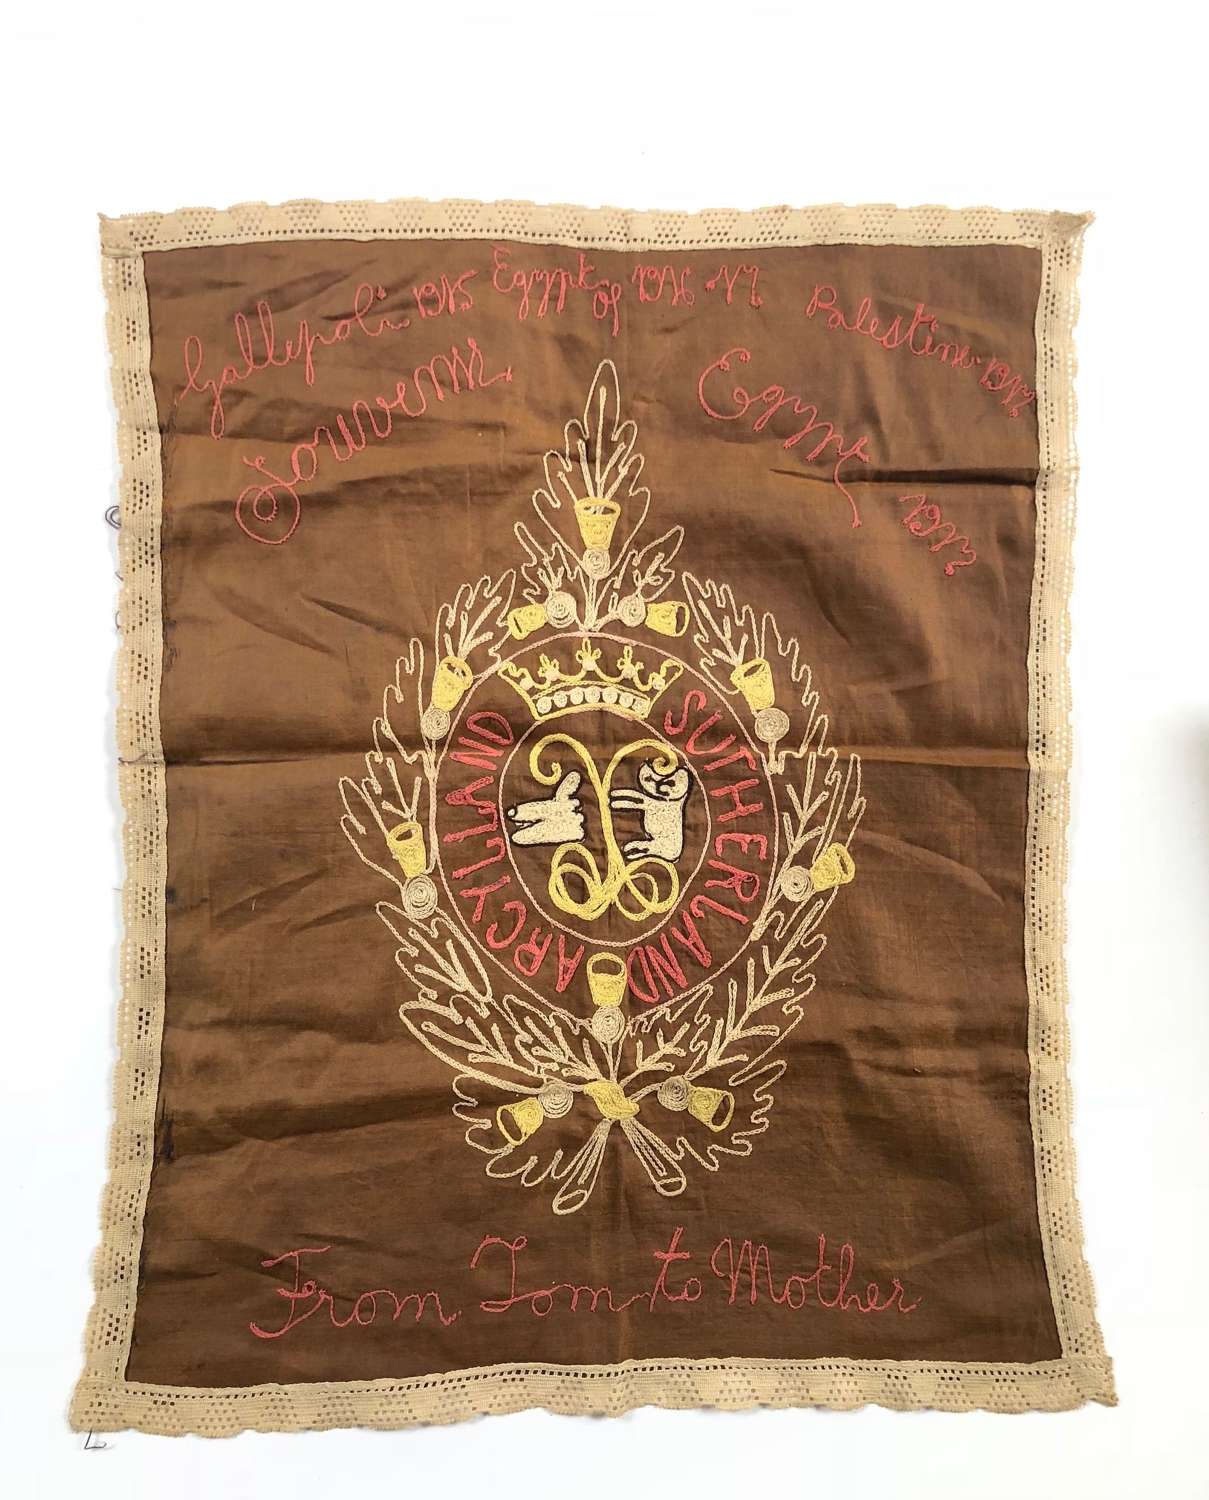 WW1 Argyll & Sutherland Highlanders Embroidered Pillow Case Front.